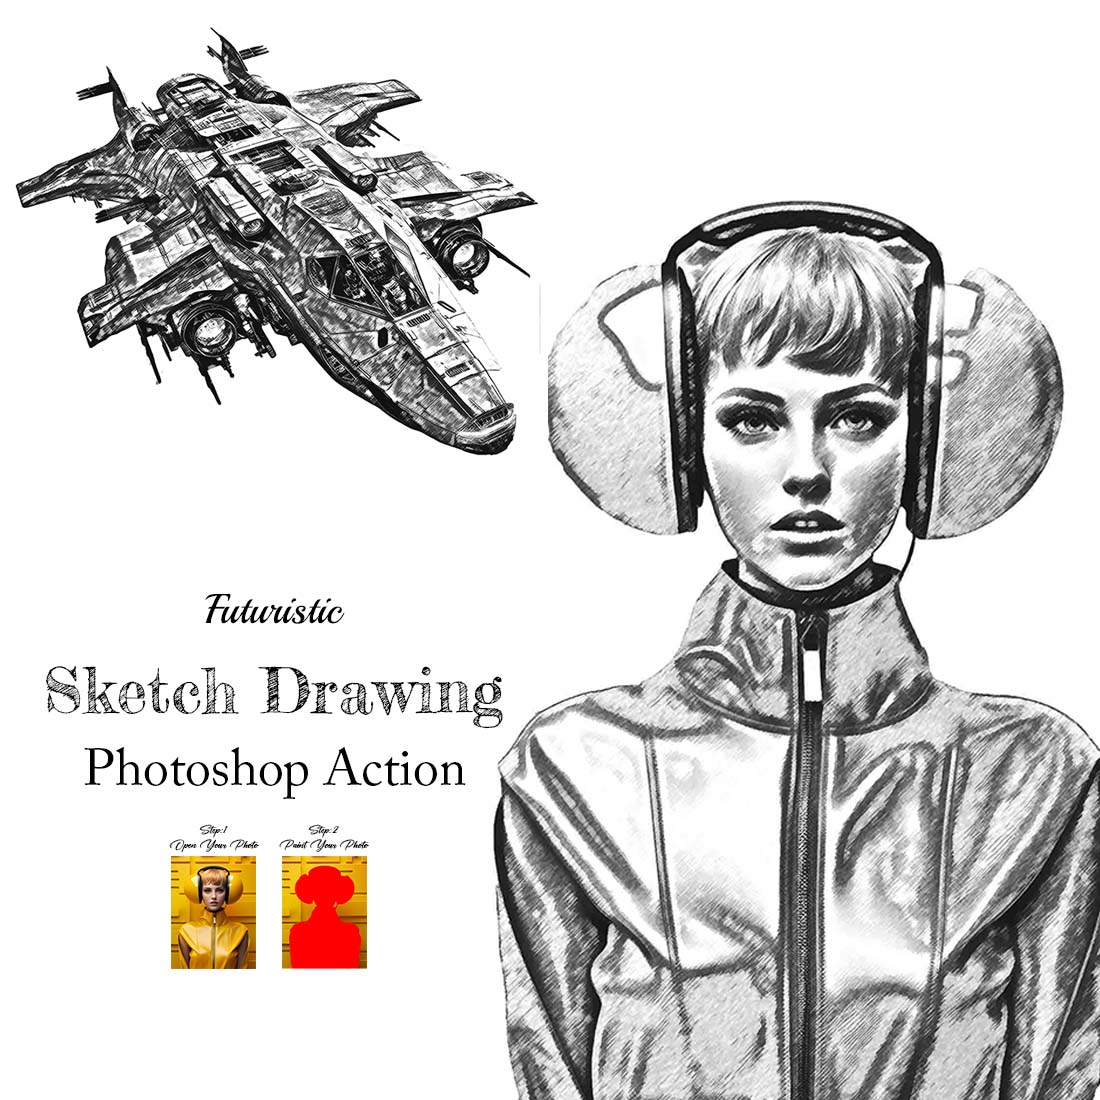 Futuristic Sketch Drawing Photoshop Action cover image.